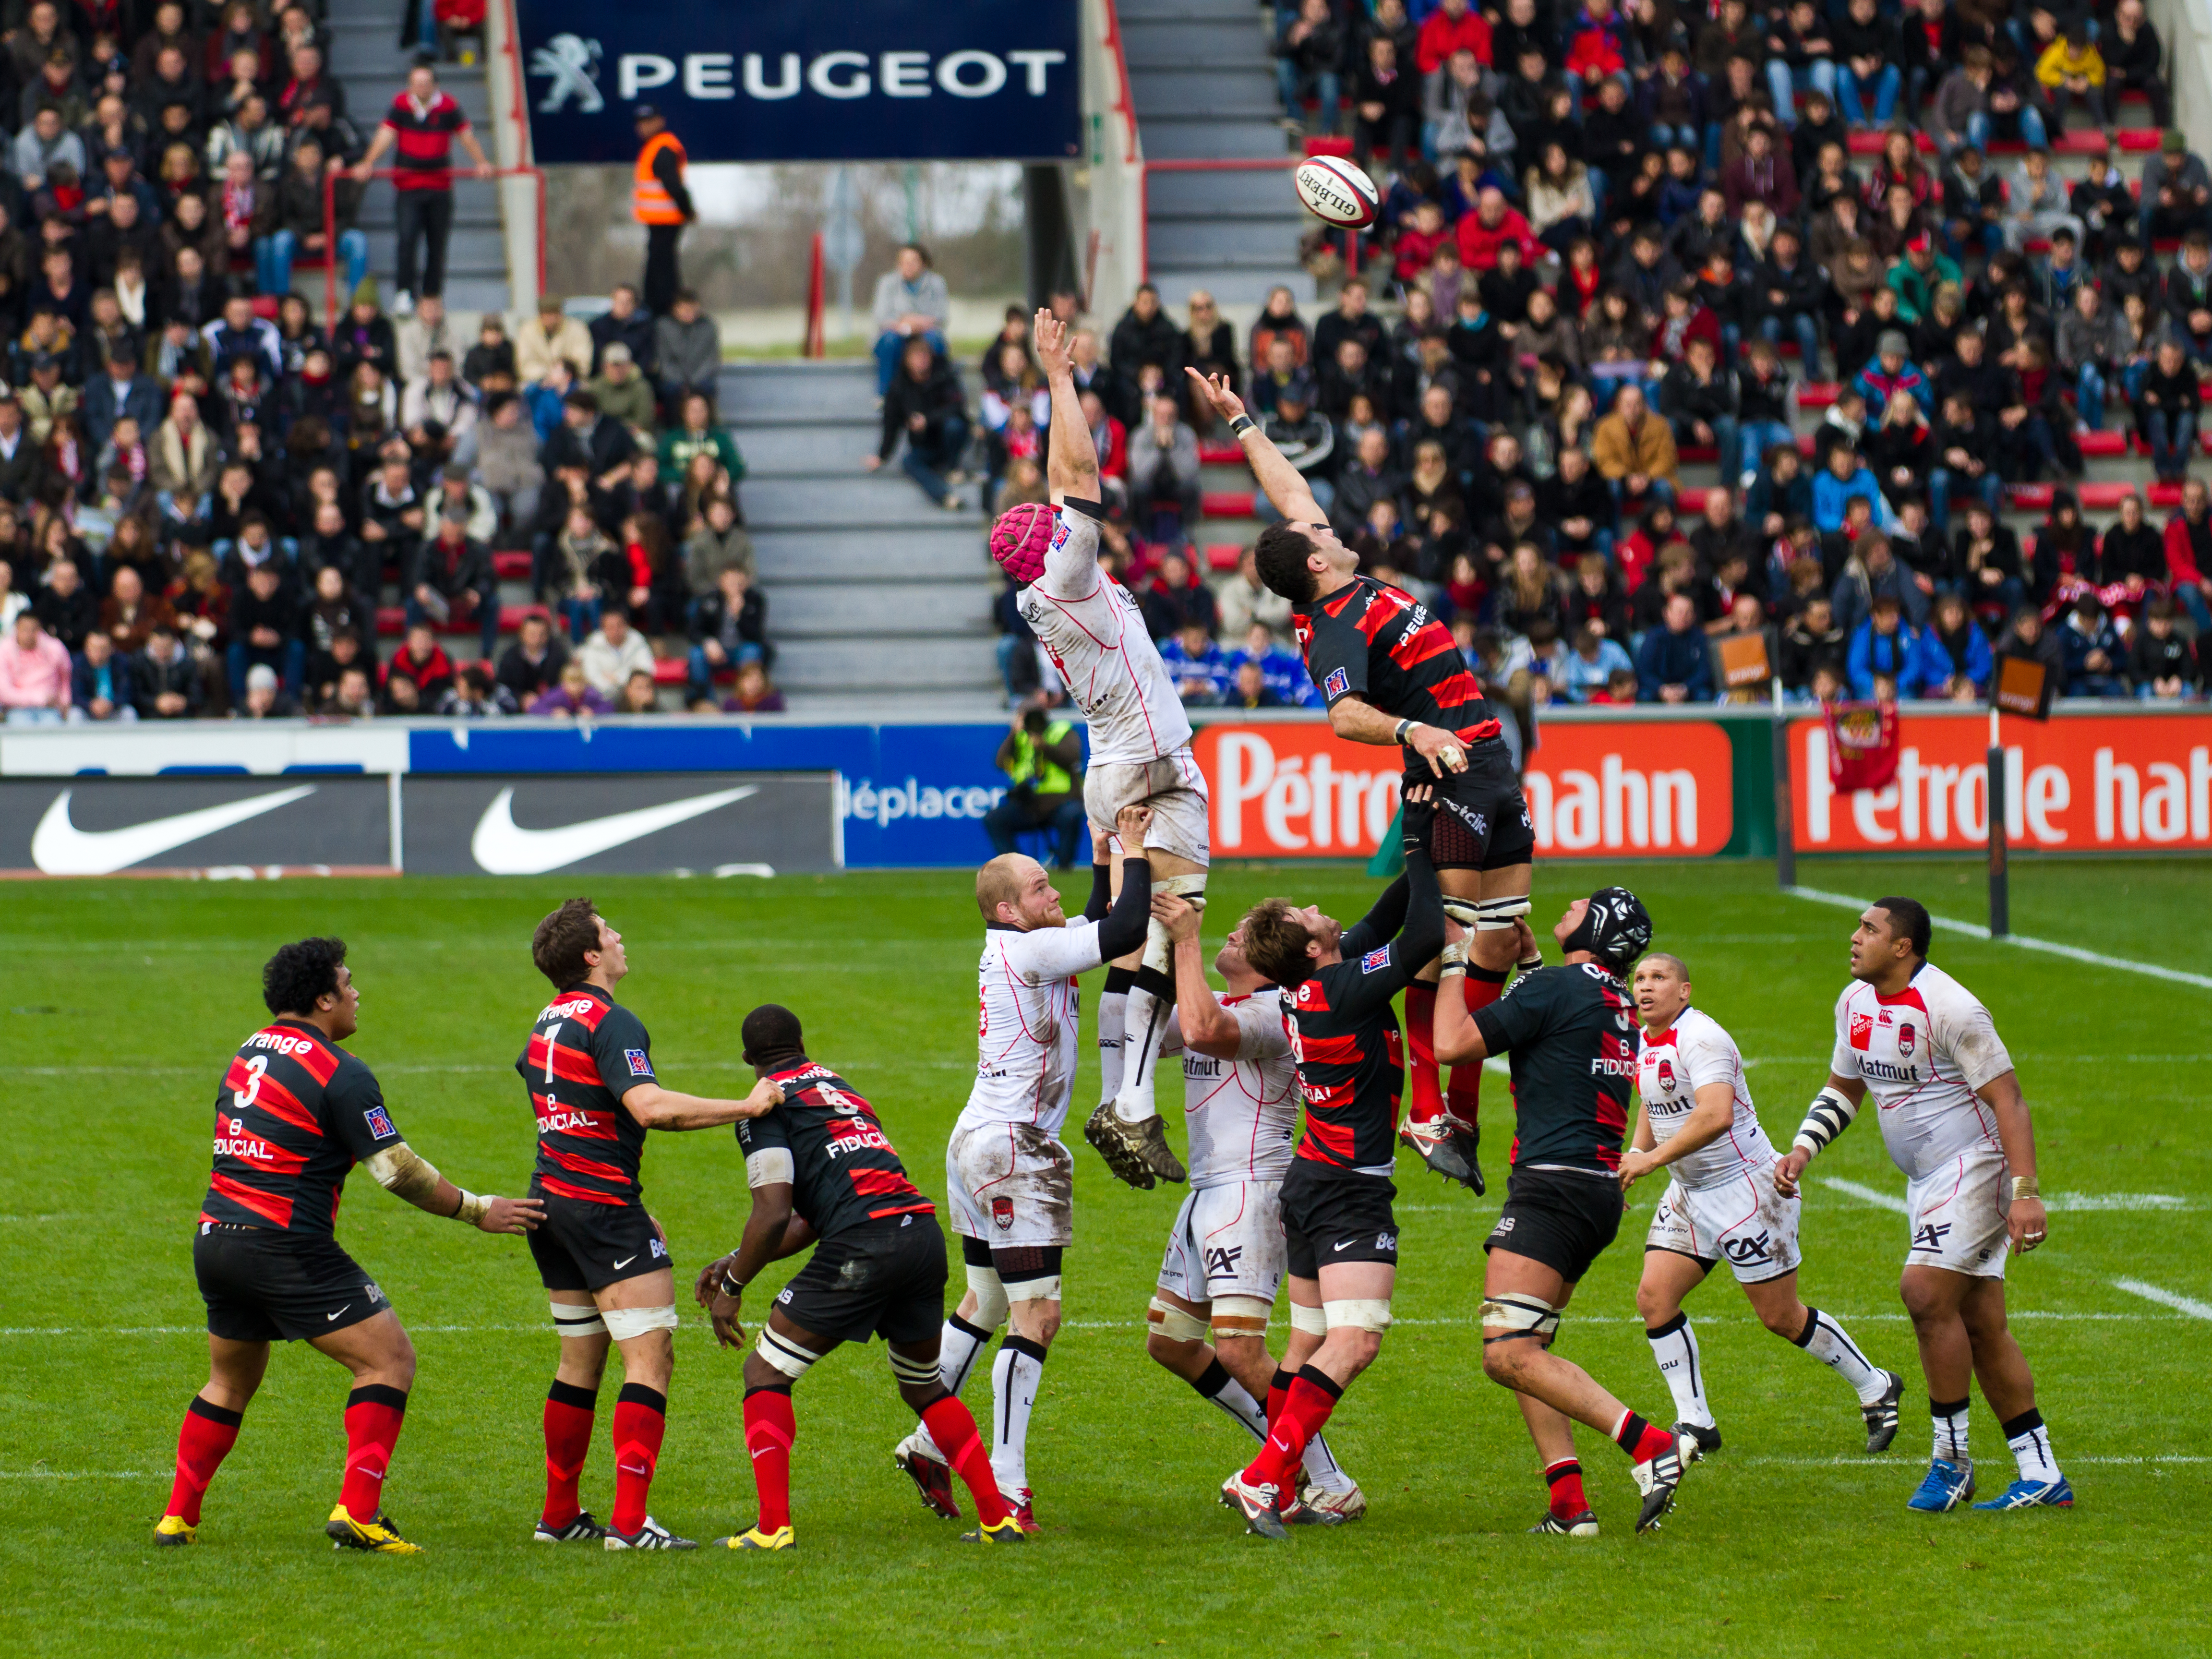 Line-out (rugby union) - Wikipedia